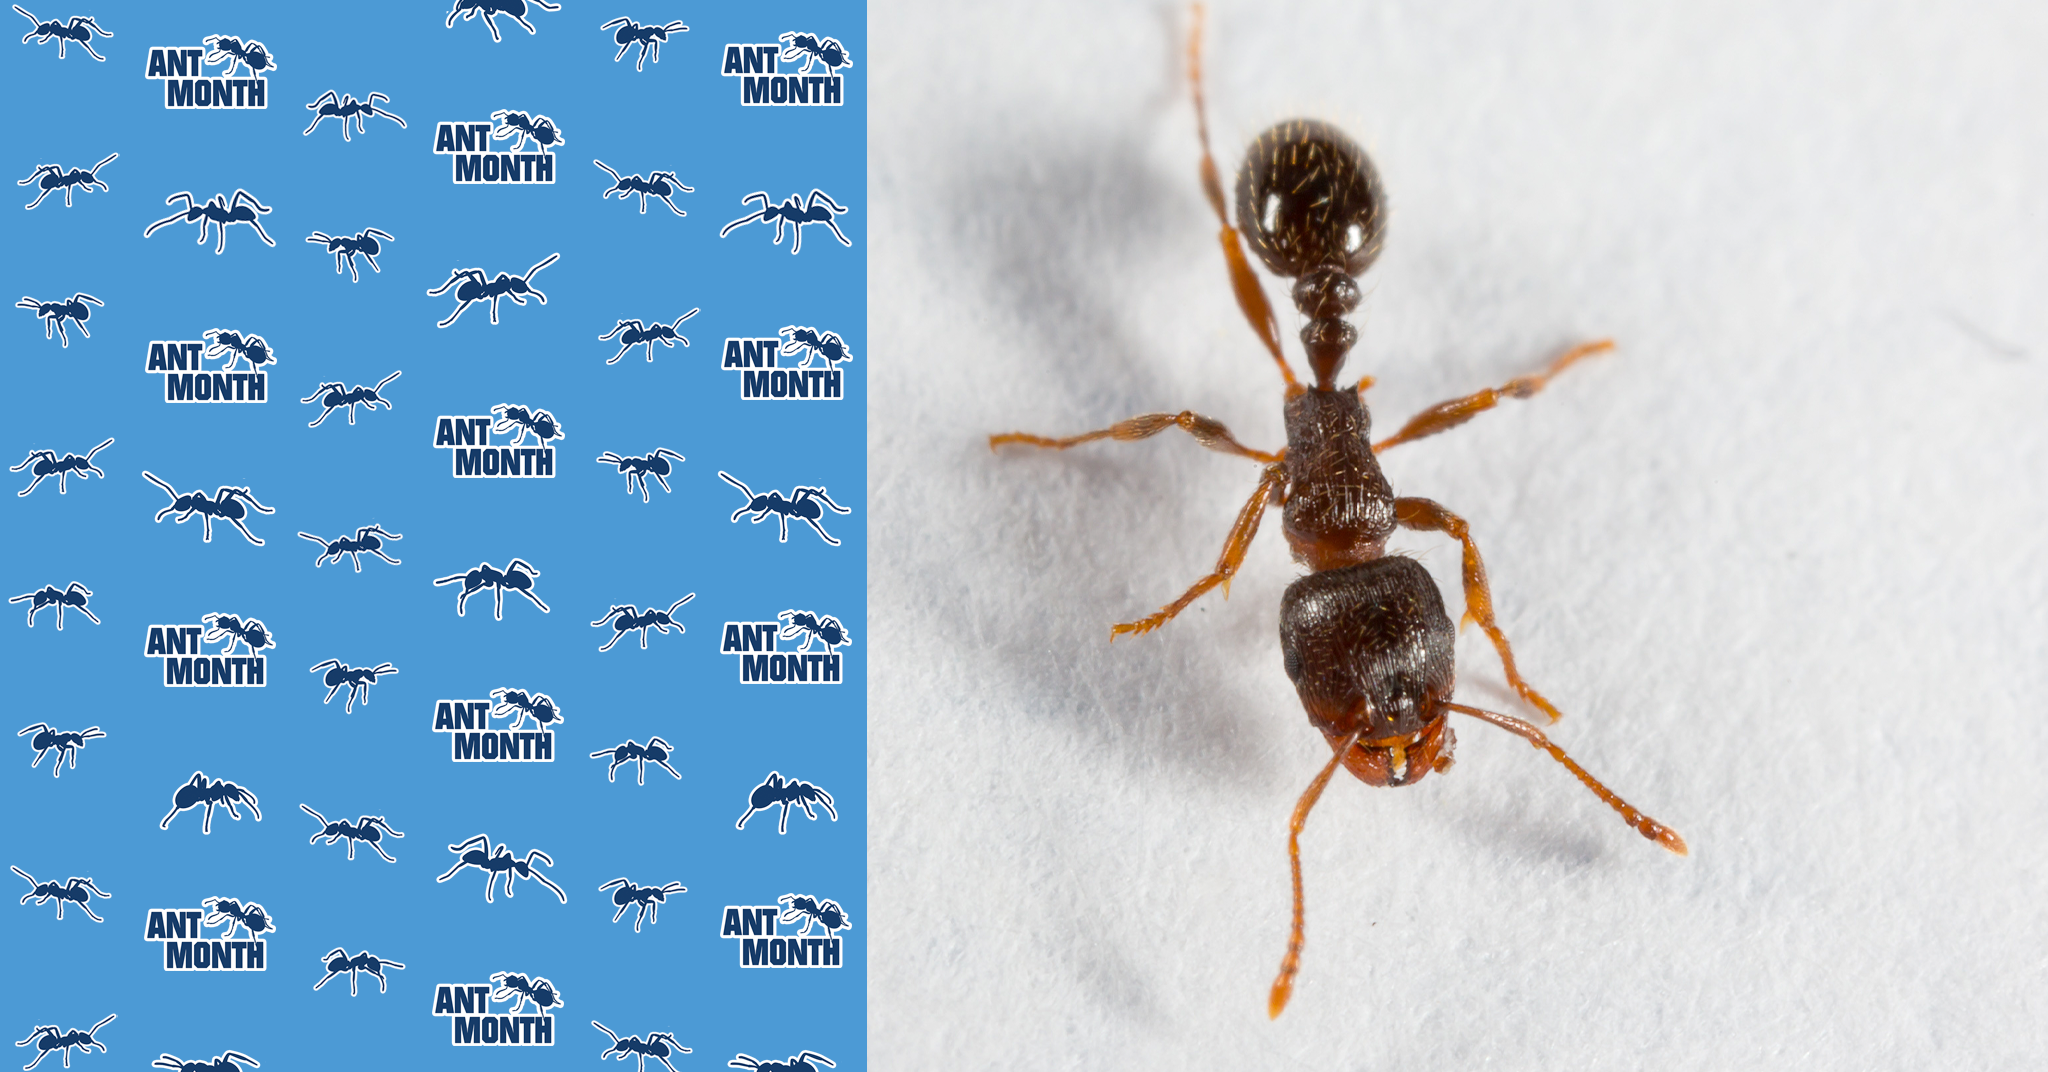 ANT MONTH: All About… Pavement Ants